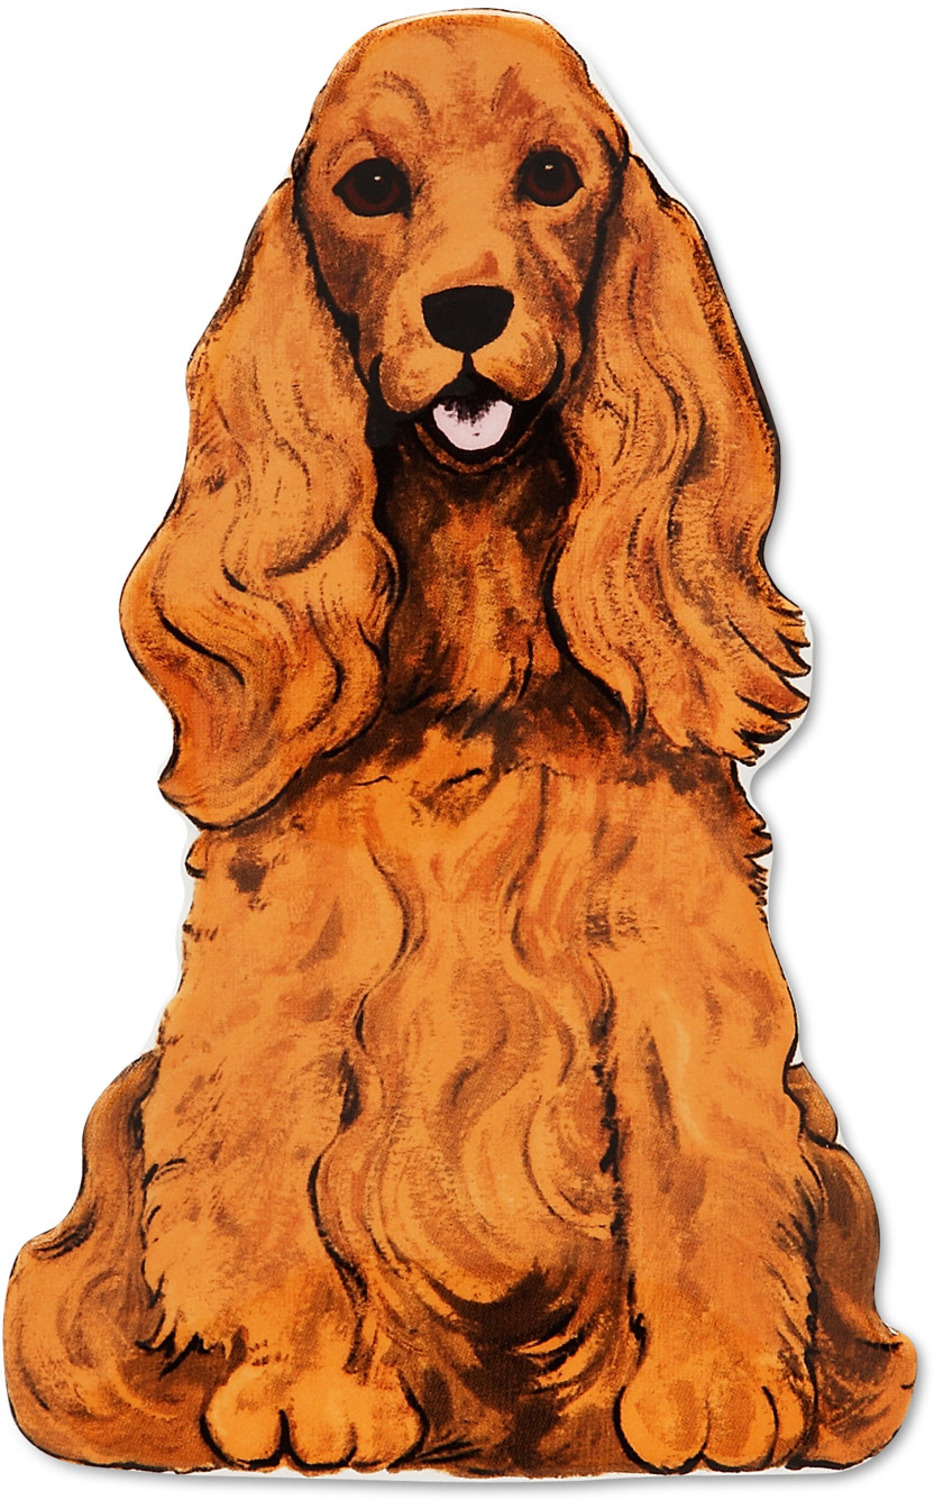 Tanner - Cocker Spaniel by Rescue Me Now - Tanner - Cocker Spaniel - 7.25" Dog Spoon Rest